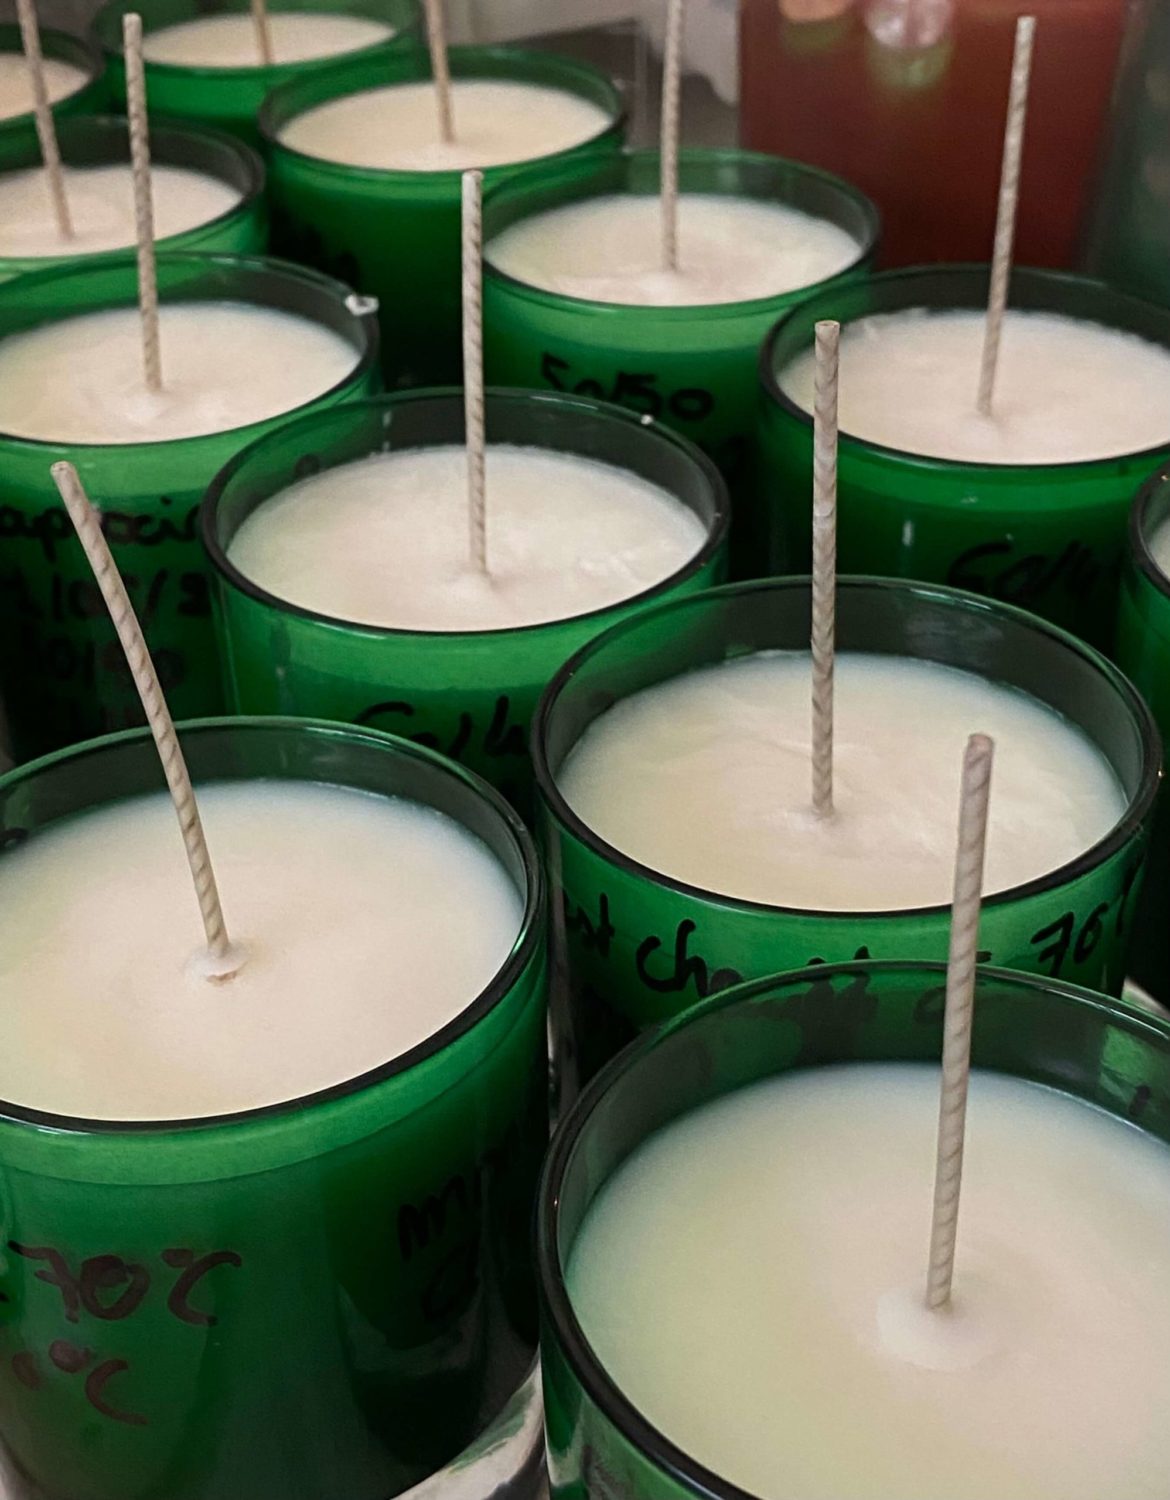 making wax candles 100% vegetable